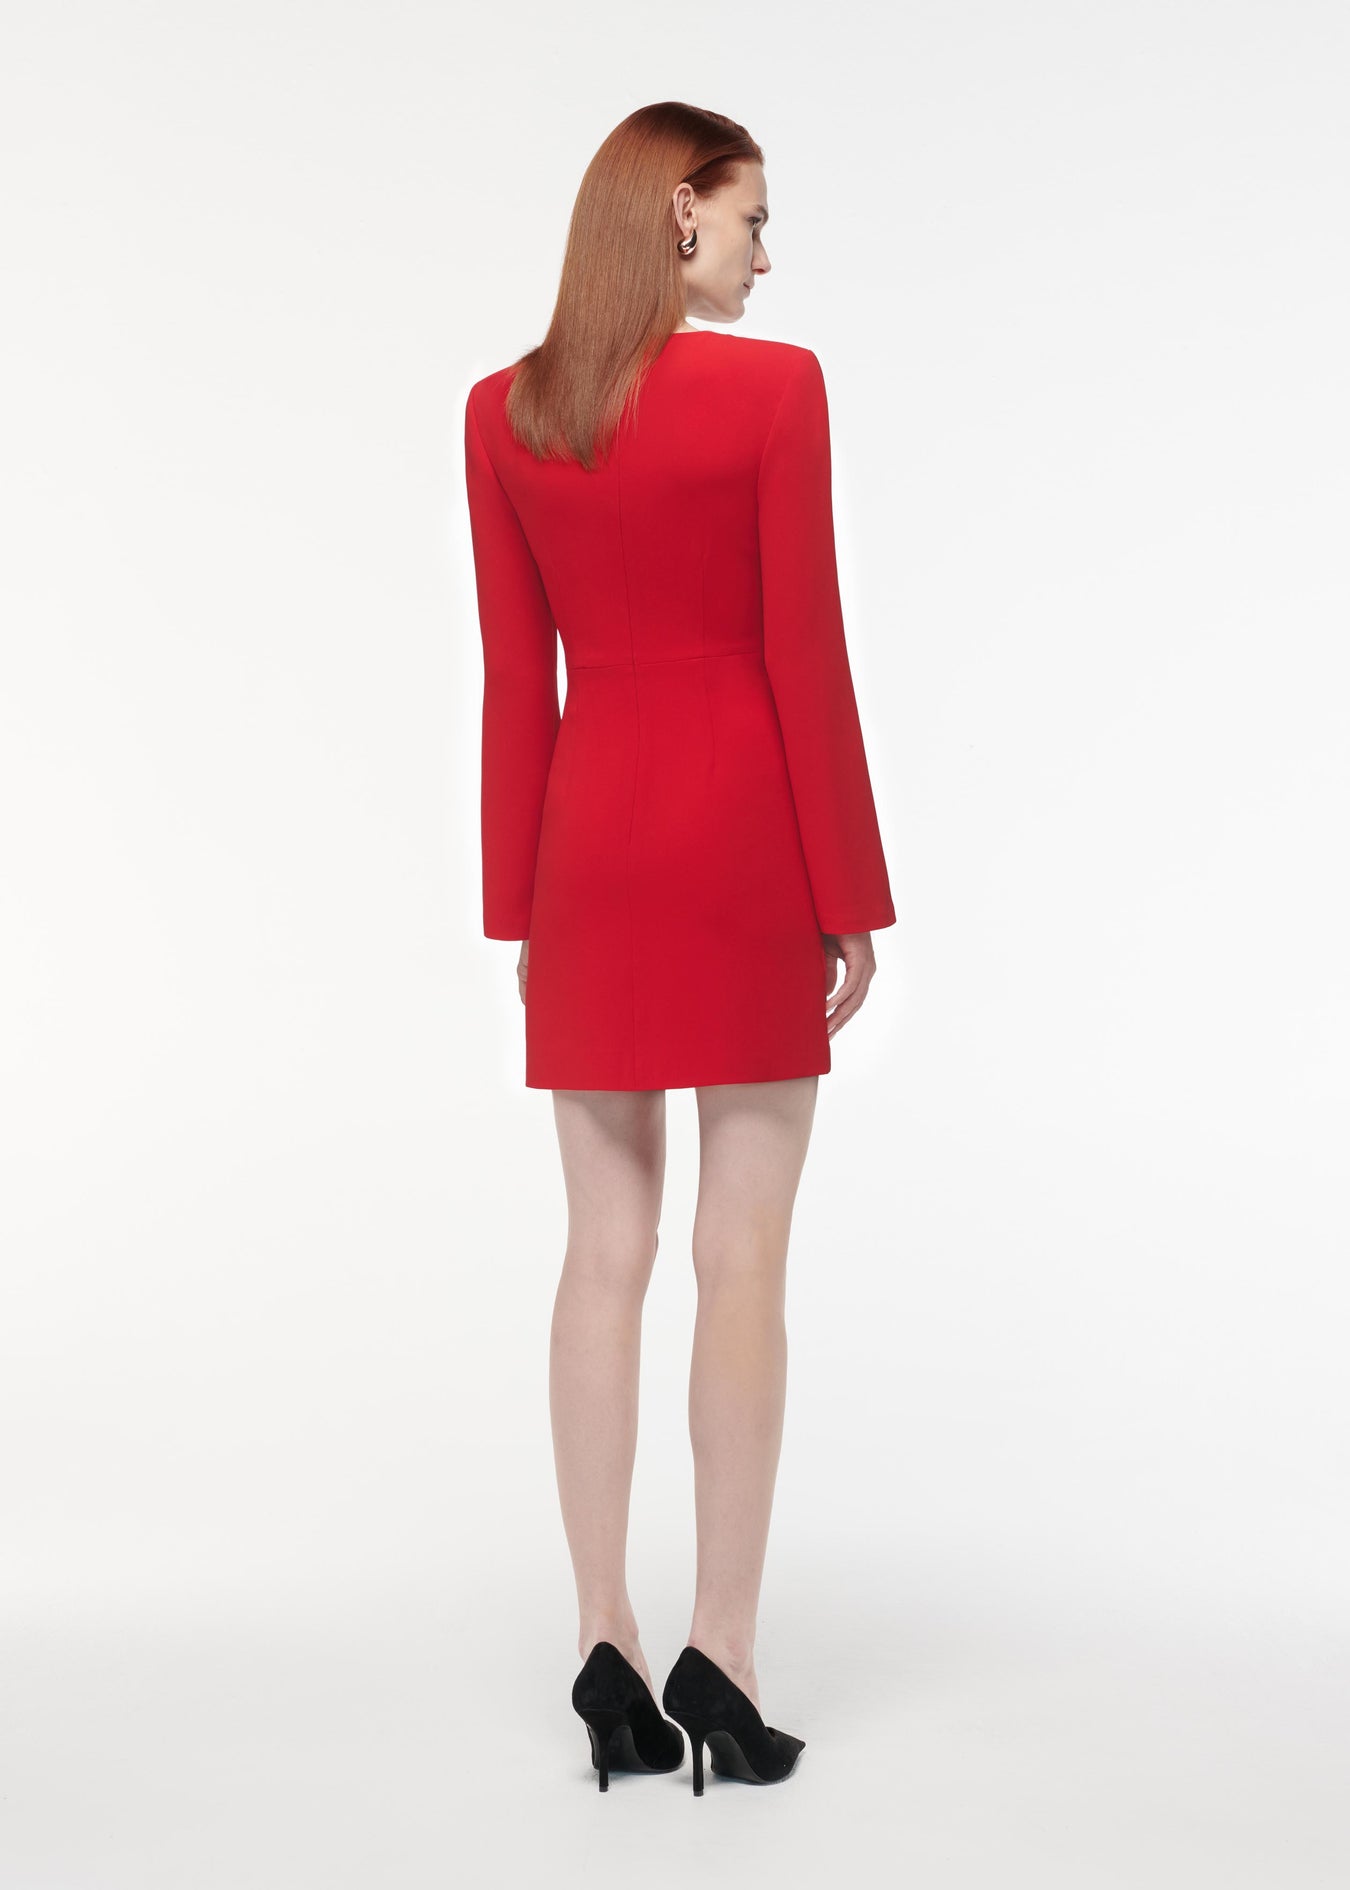 A photograph of a woman wearing a Long Sleeve Flower Detail Mini Dress in Red